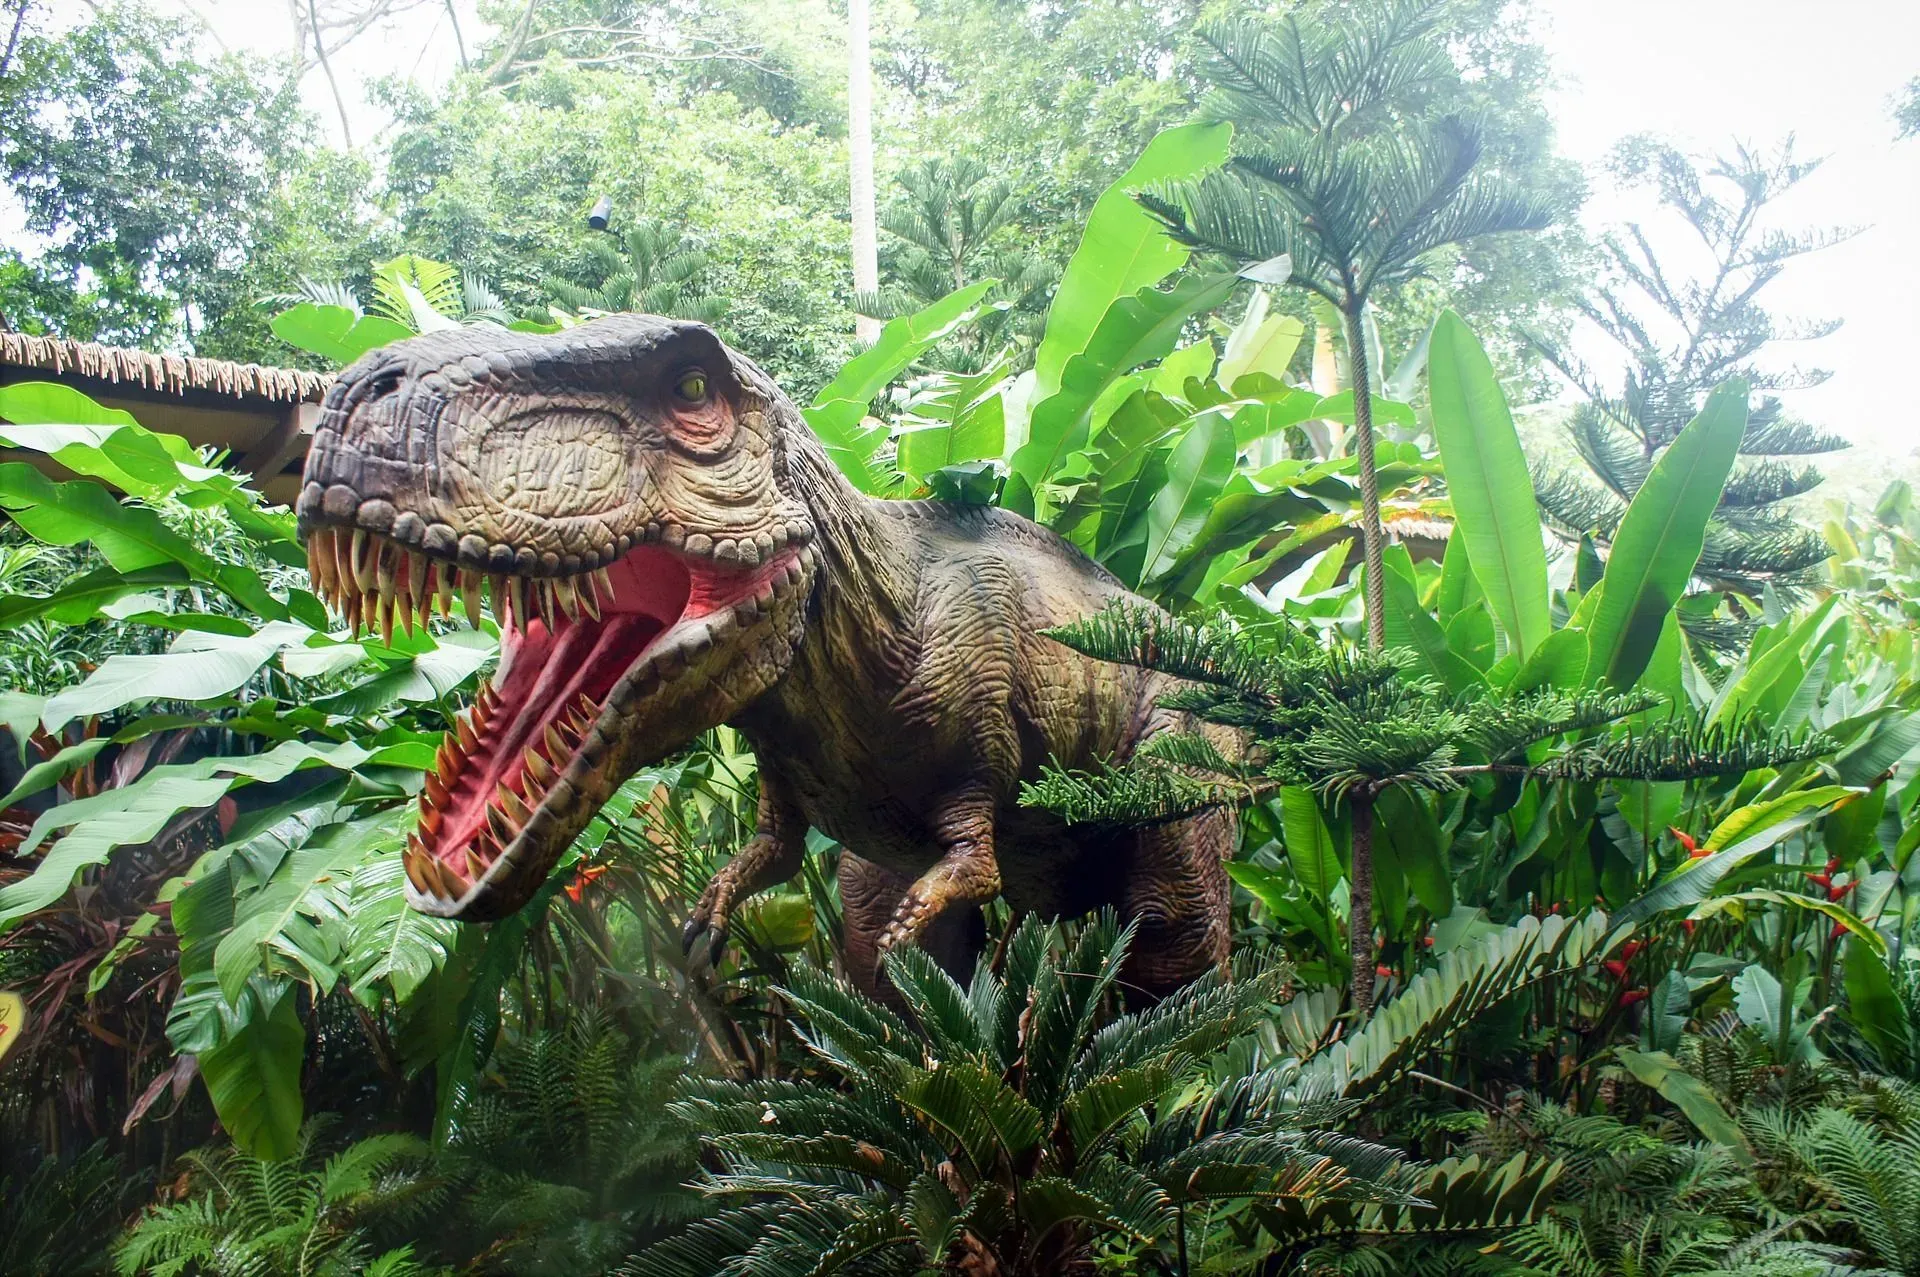 These horrifying and gigantic-looking dinosaurs are herbivorous. Isn't it surprising?